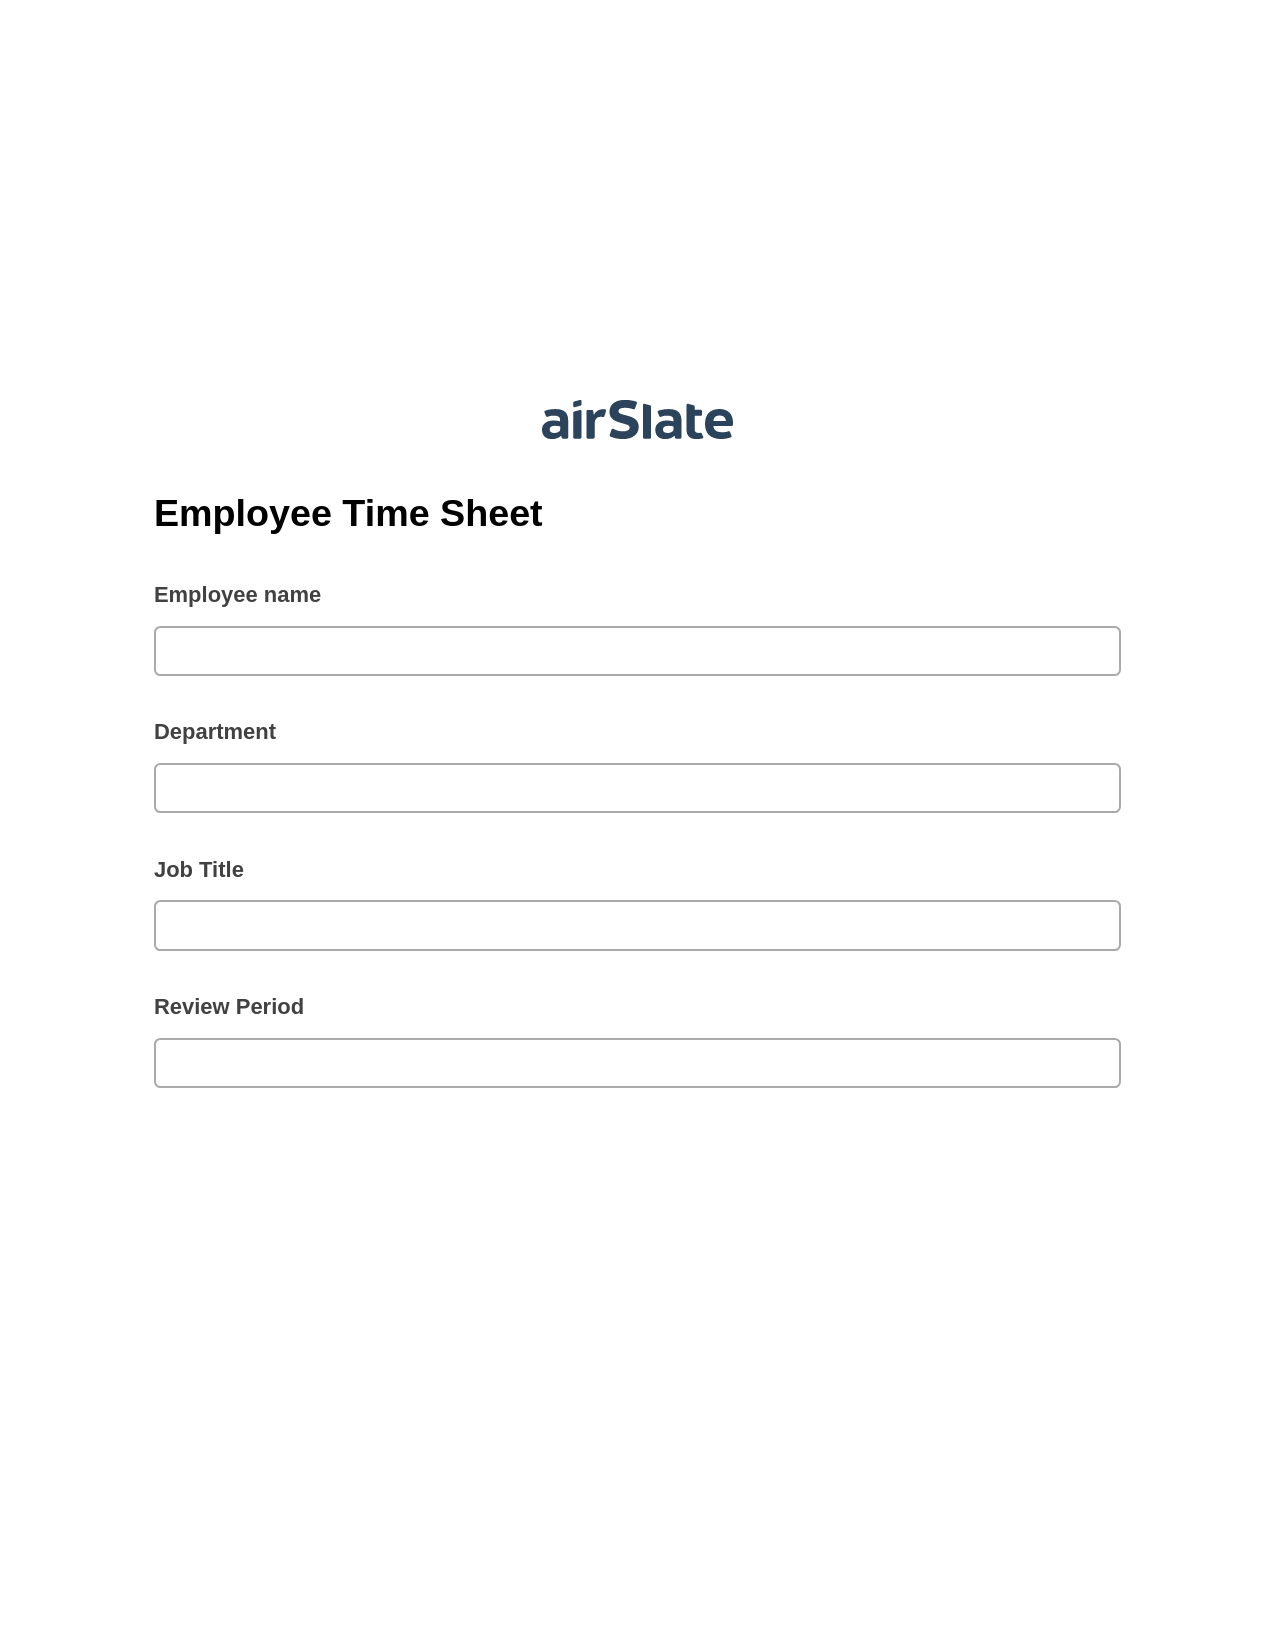 Multirole Employee Time Sheet Pre-fill from CSV File Bot, Send a Slate with Roles Bot, Archive to Dropbox Bot